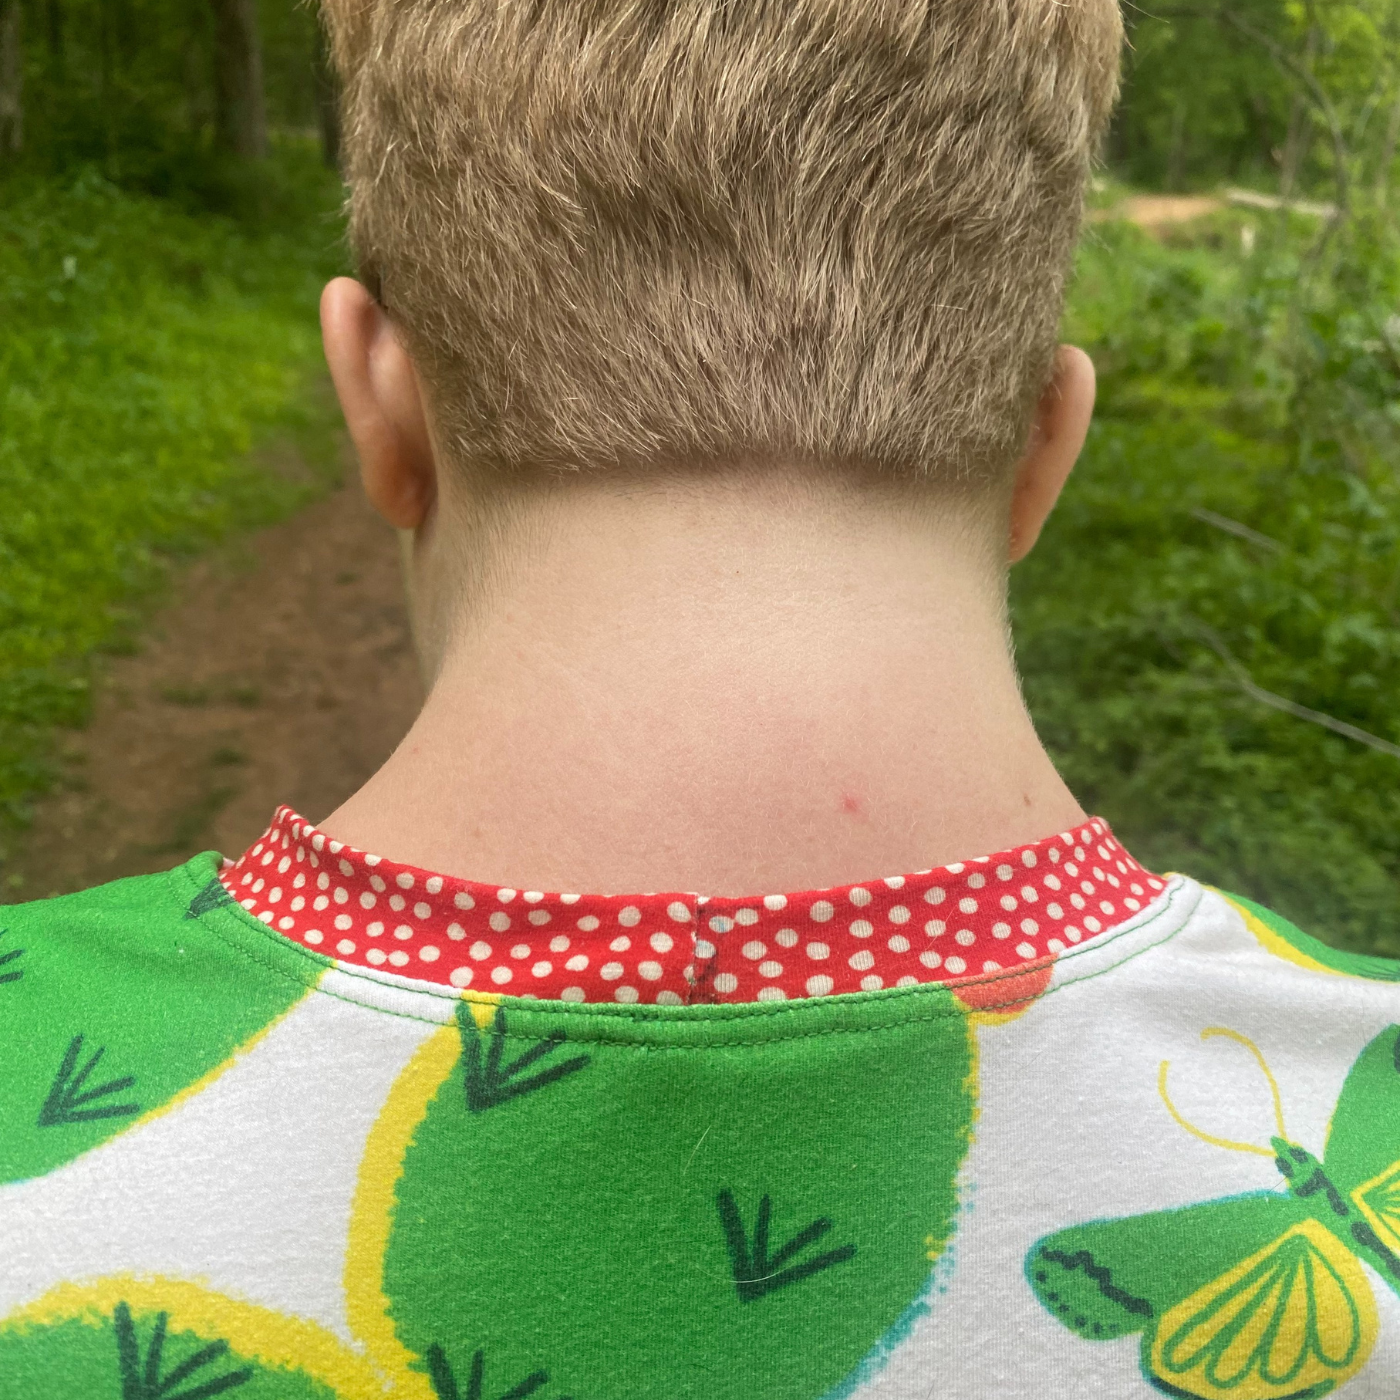 A close up of the back neckline of a dress with a white background and a repeating green cactus design. The cacti have red blossoms and green-and-yellow moths floats near some of the blossoms. The neckline has been ringed with red bias tape that has white dots.